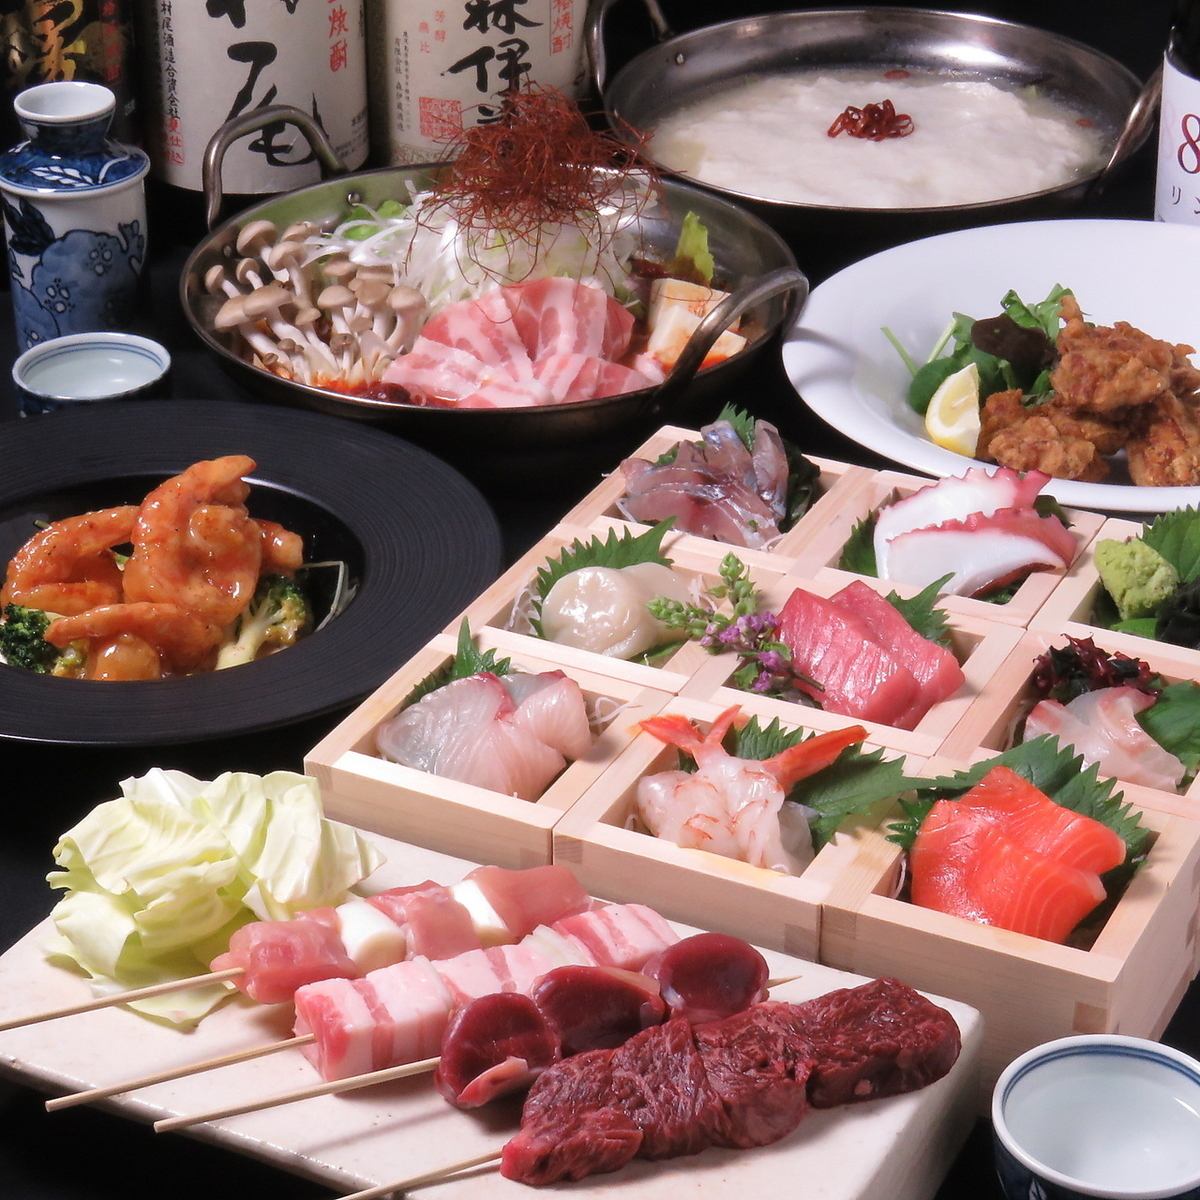 [Kiwami] 8-item 6,000 yen (tax included) 2-hour all-you-can-drink course featuring 5 kinds of yakitori